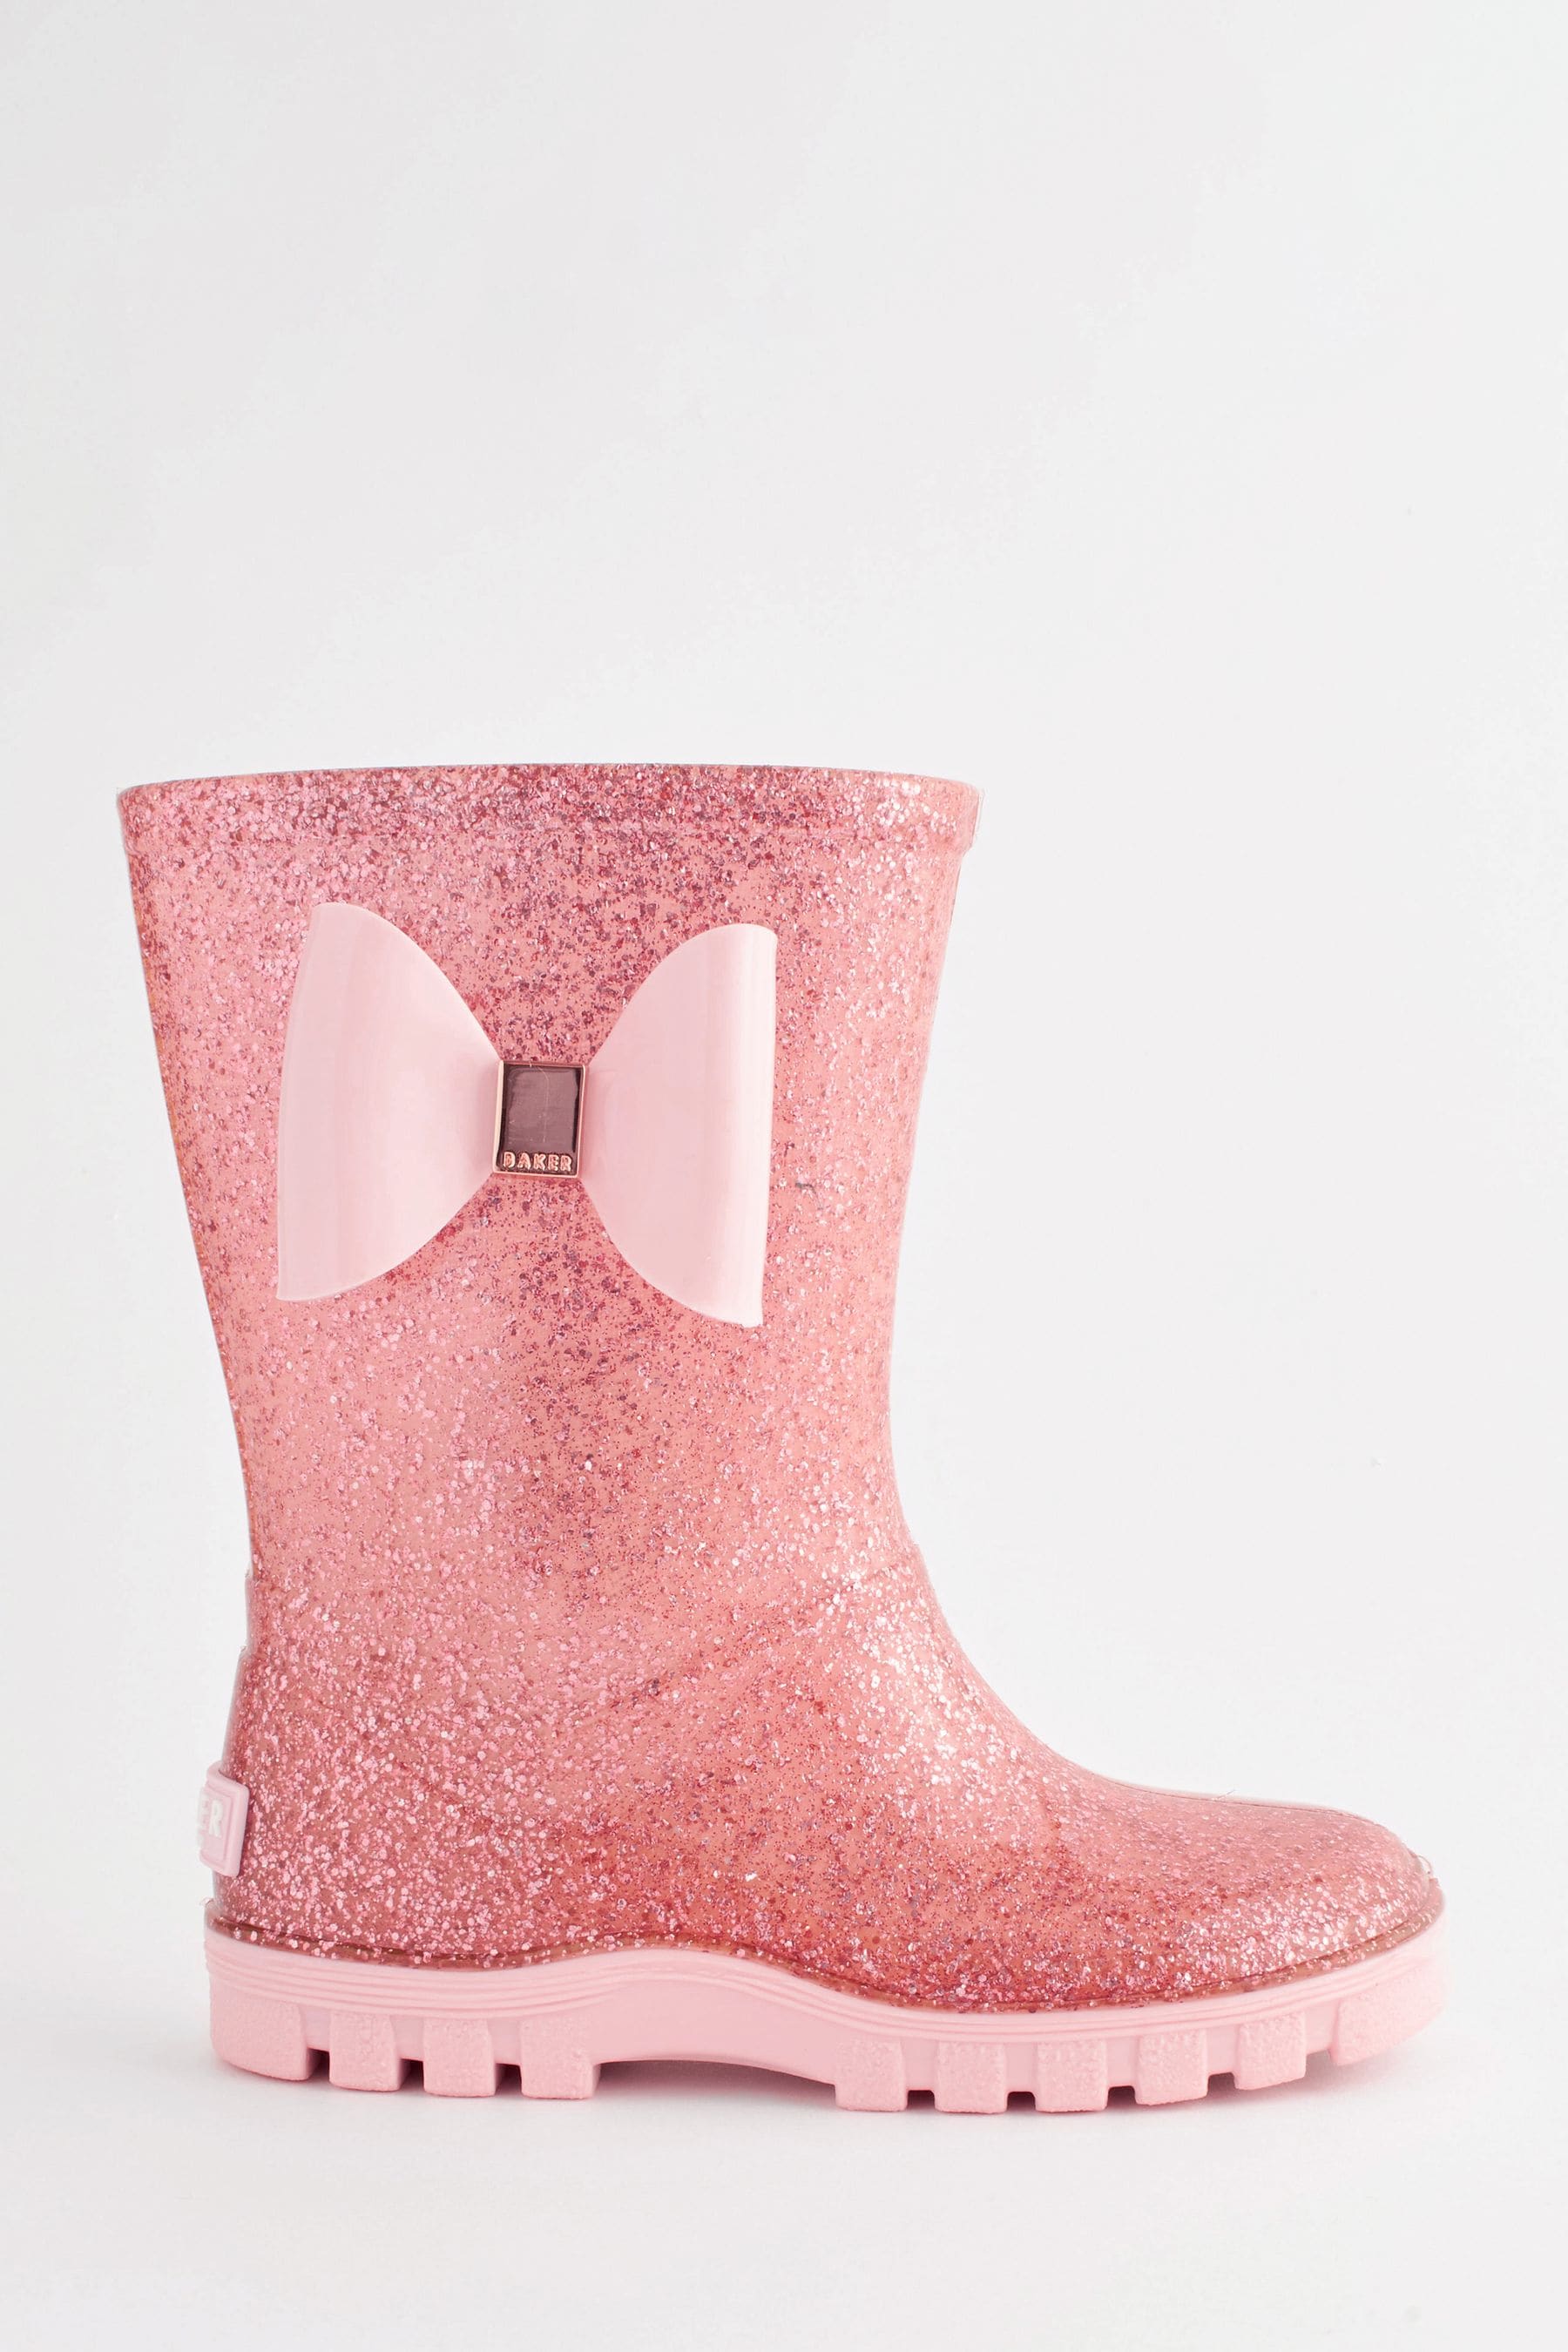 Buy Baker by Ted Baker Girls Pink Glitter Welly Boots with Bow from the ...